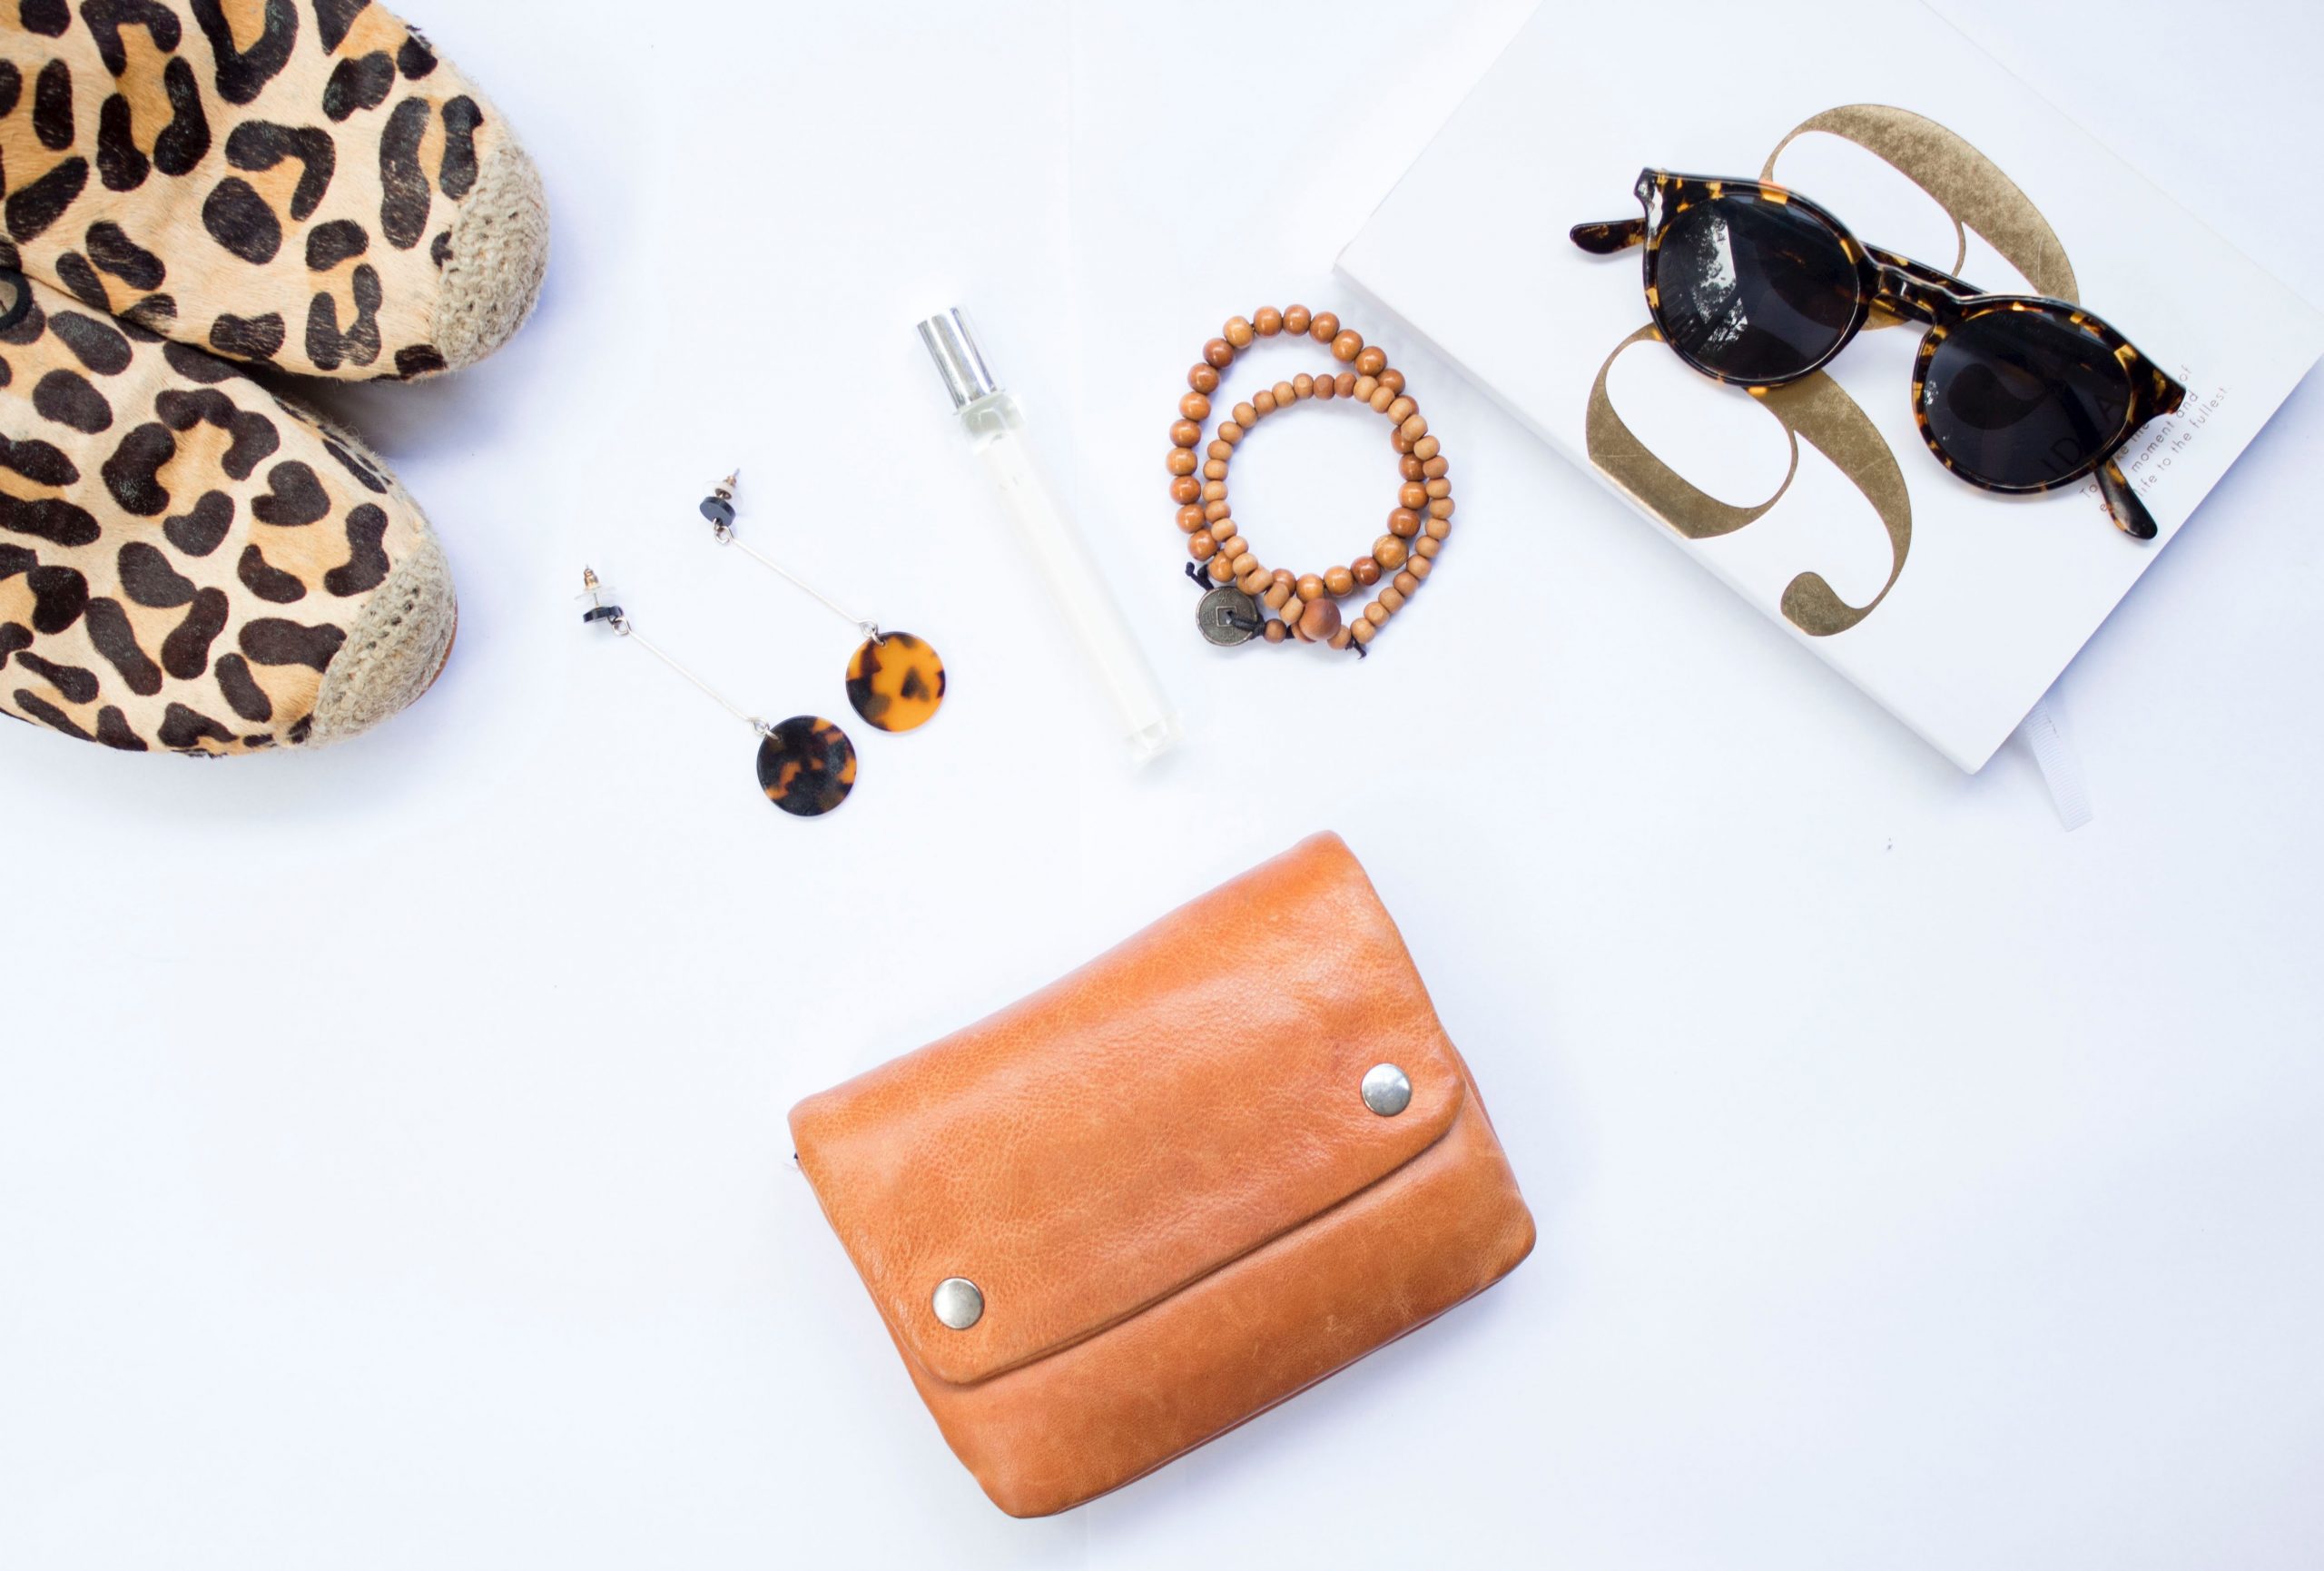 Try on these quirky accessories and add pizzazz to your look